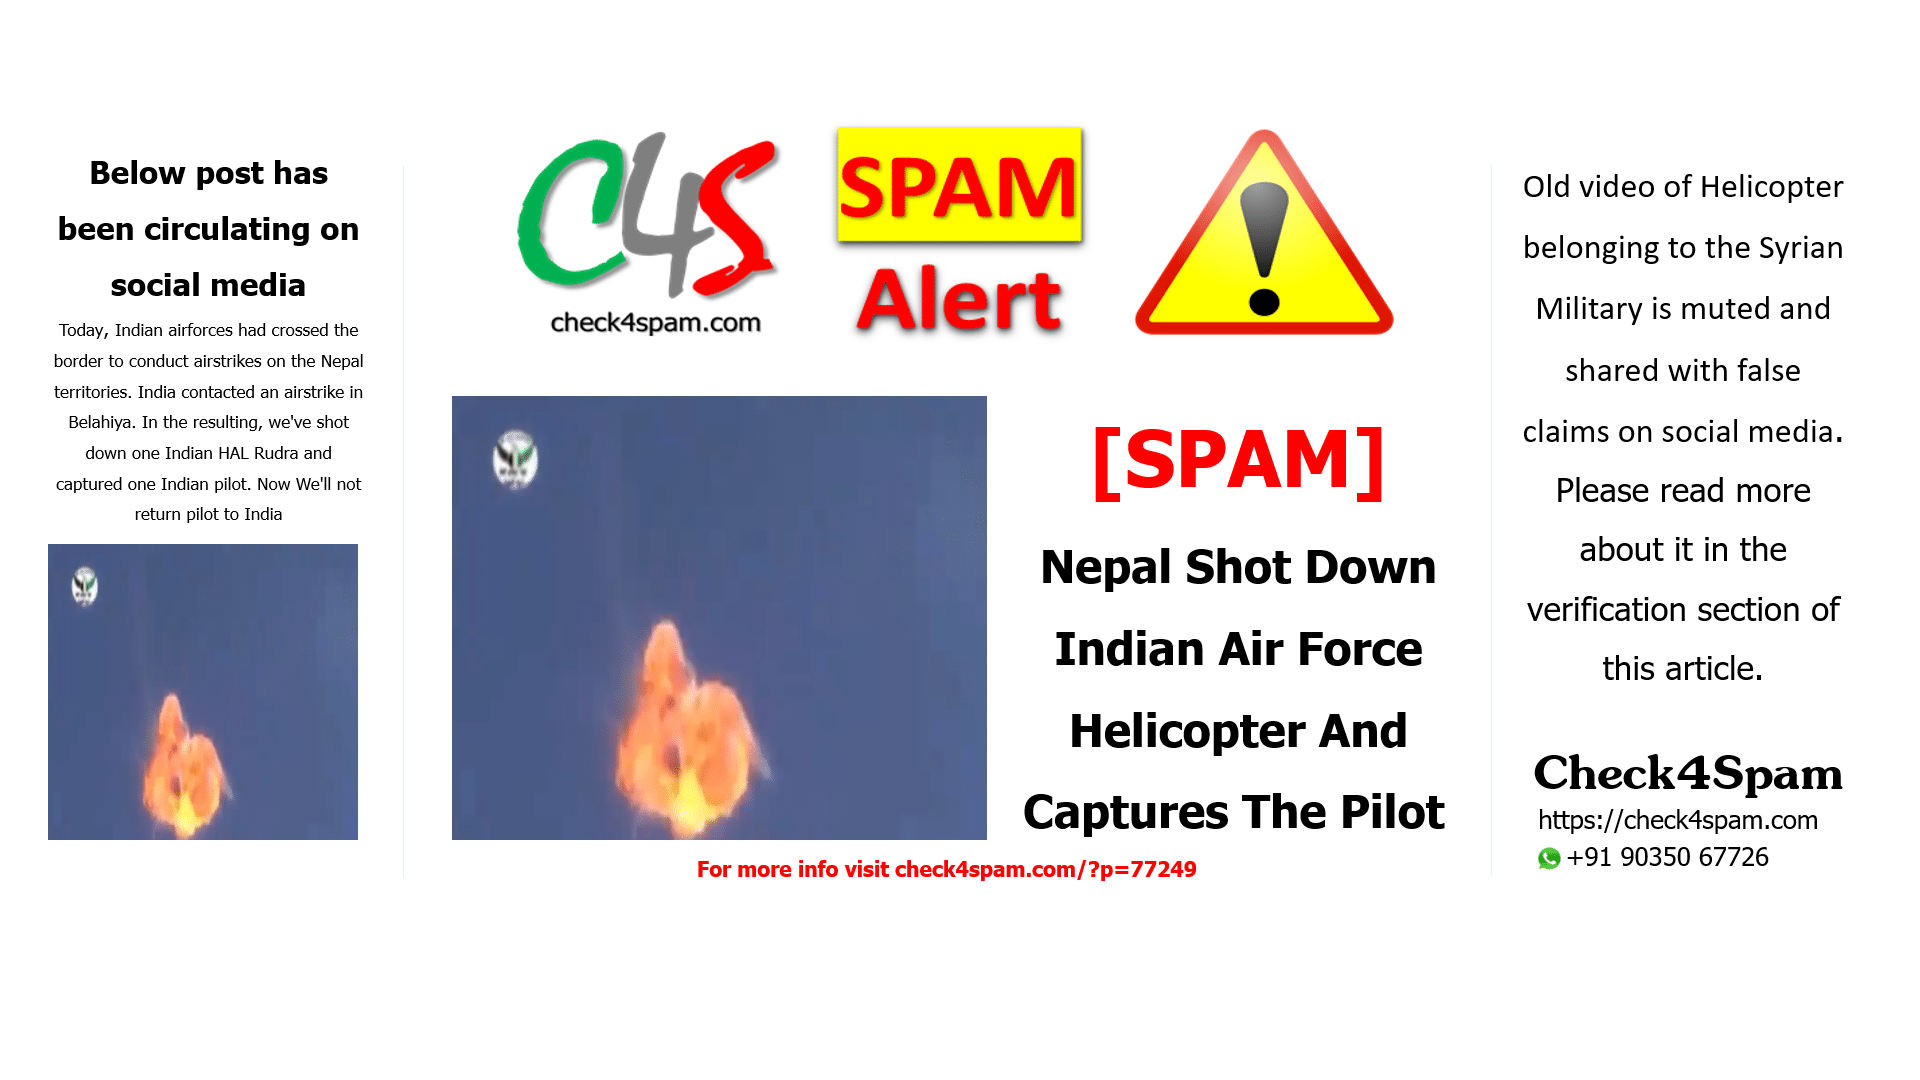 Nepal Shot Down Indian Air Force Helicopter And Captures The Pilot